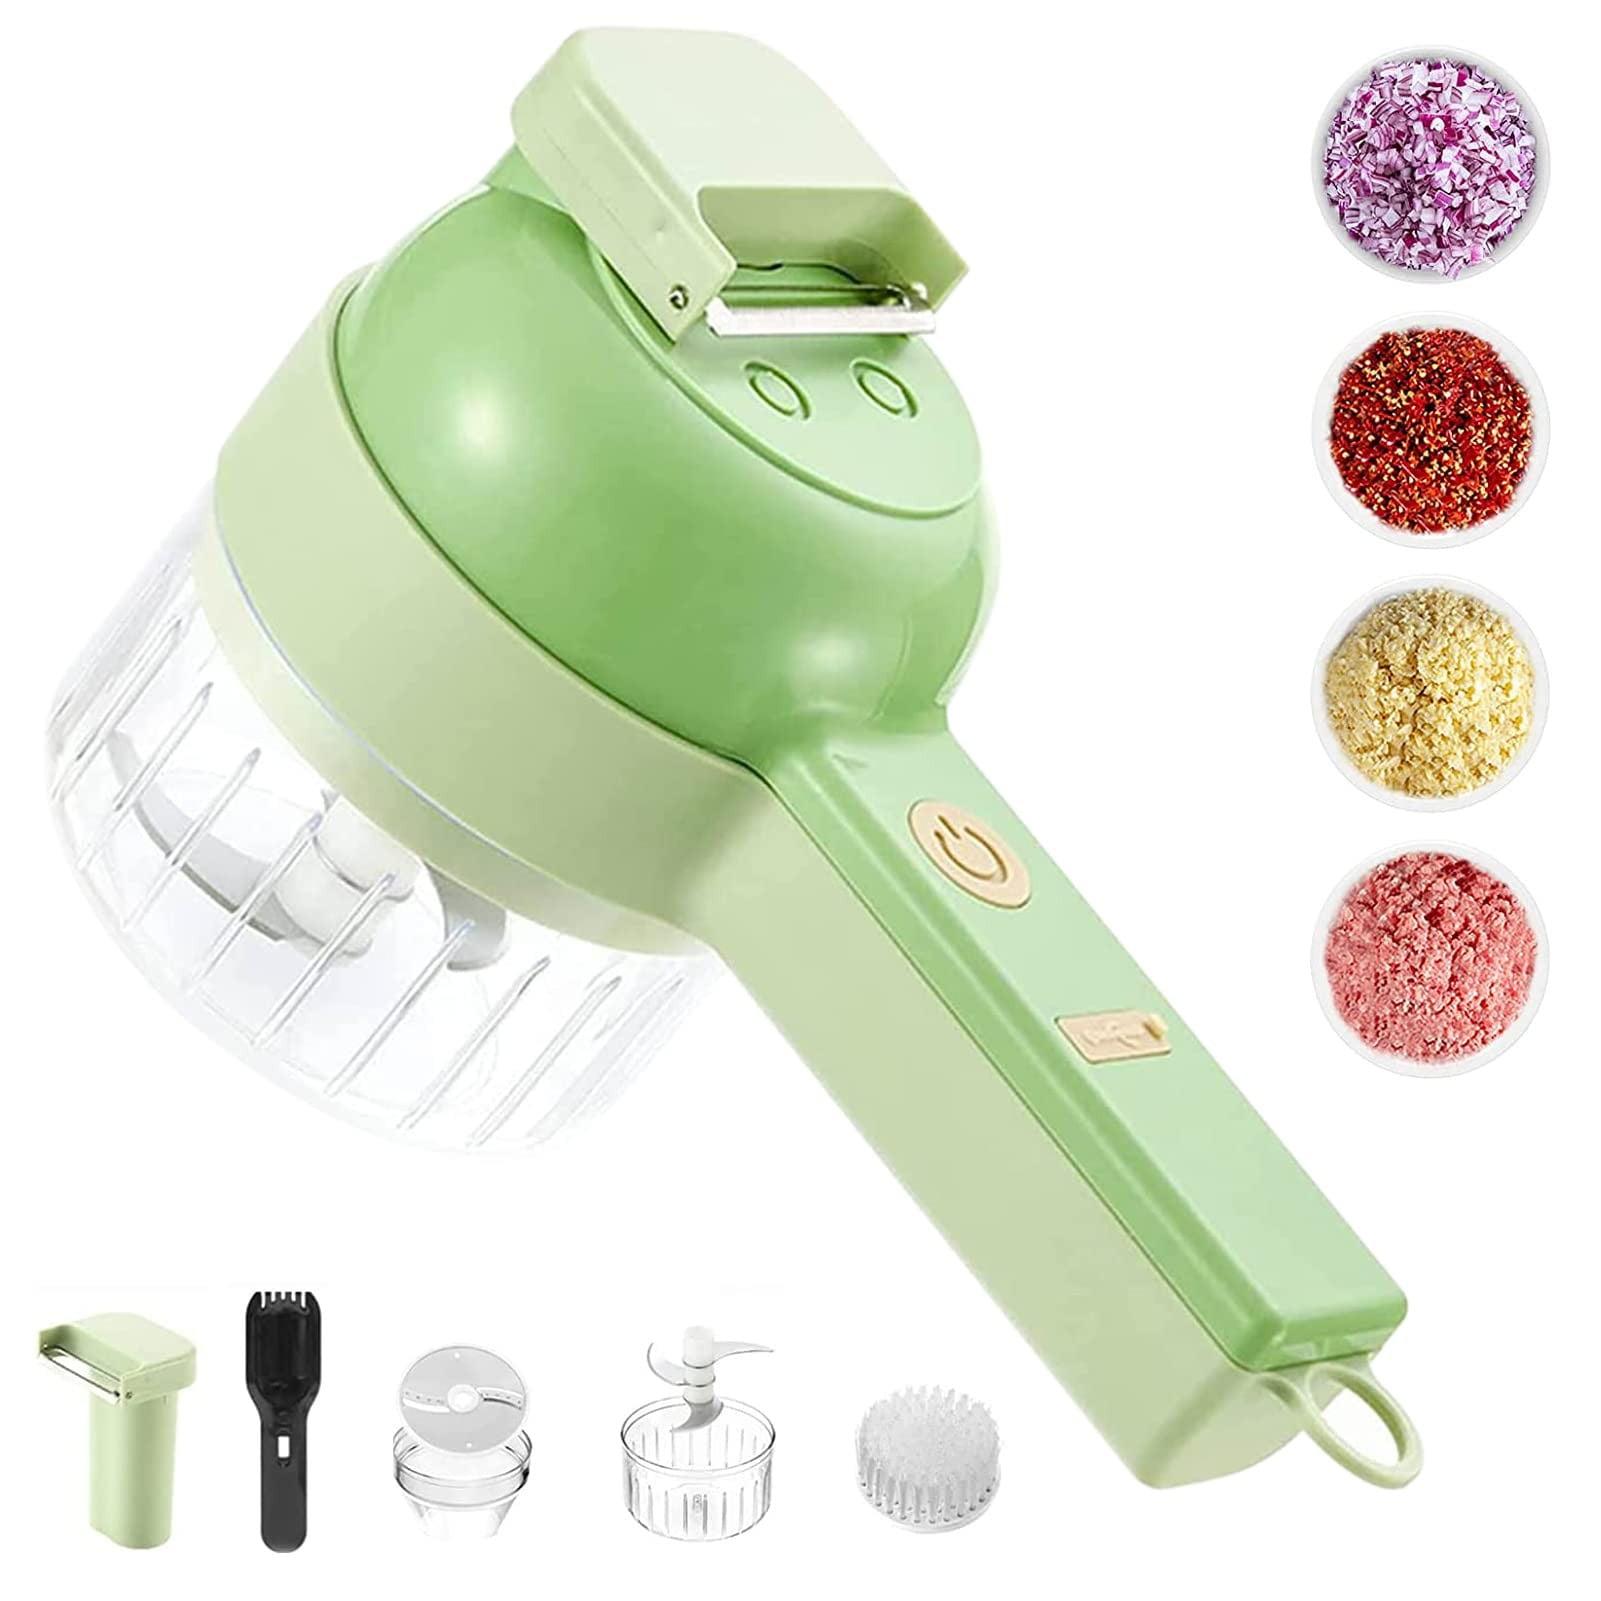 Handheld 4IN1 Electric Vegetable Slicer Multifunctional Wireless Food  Processor Garlic Chili Vegetable Cutter Carrot Chopper